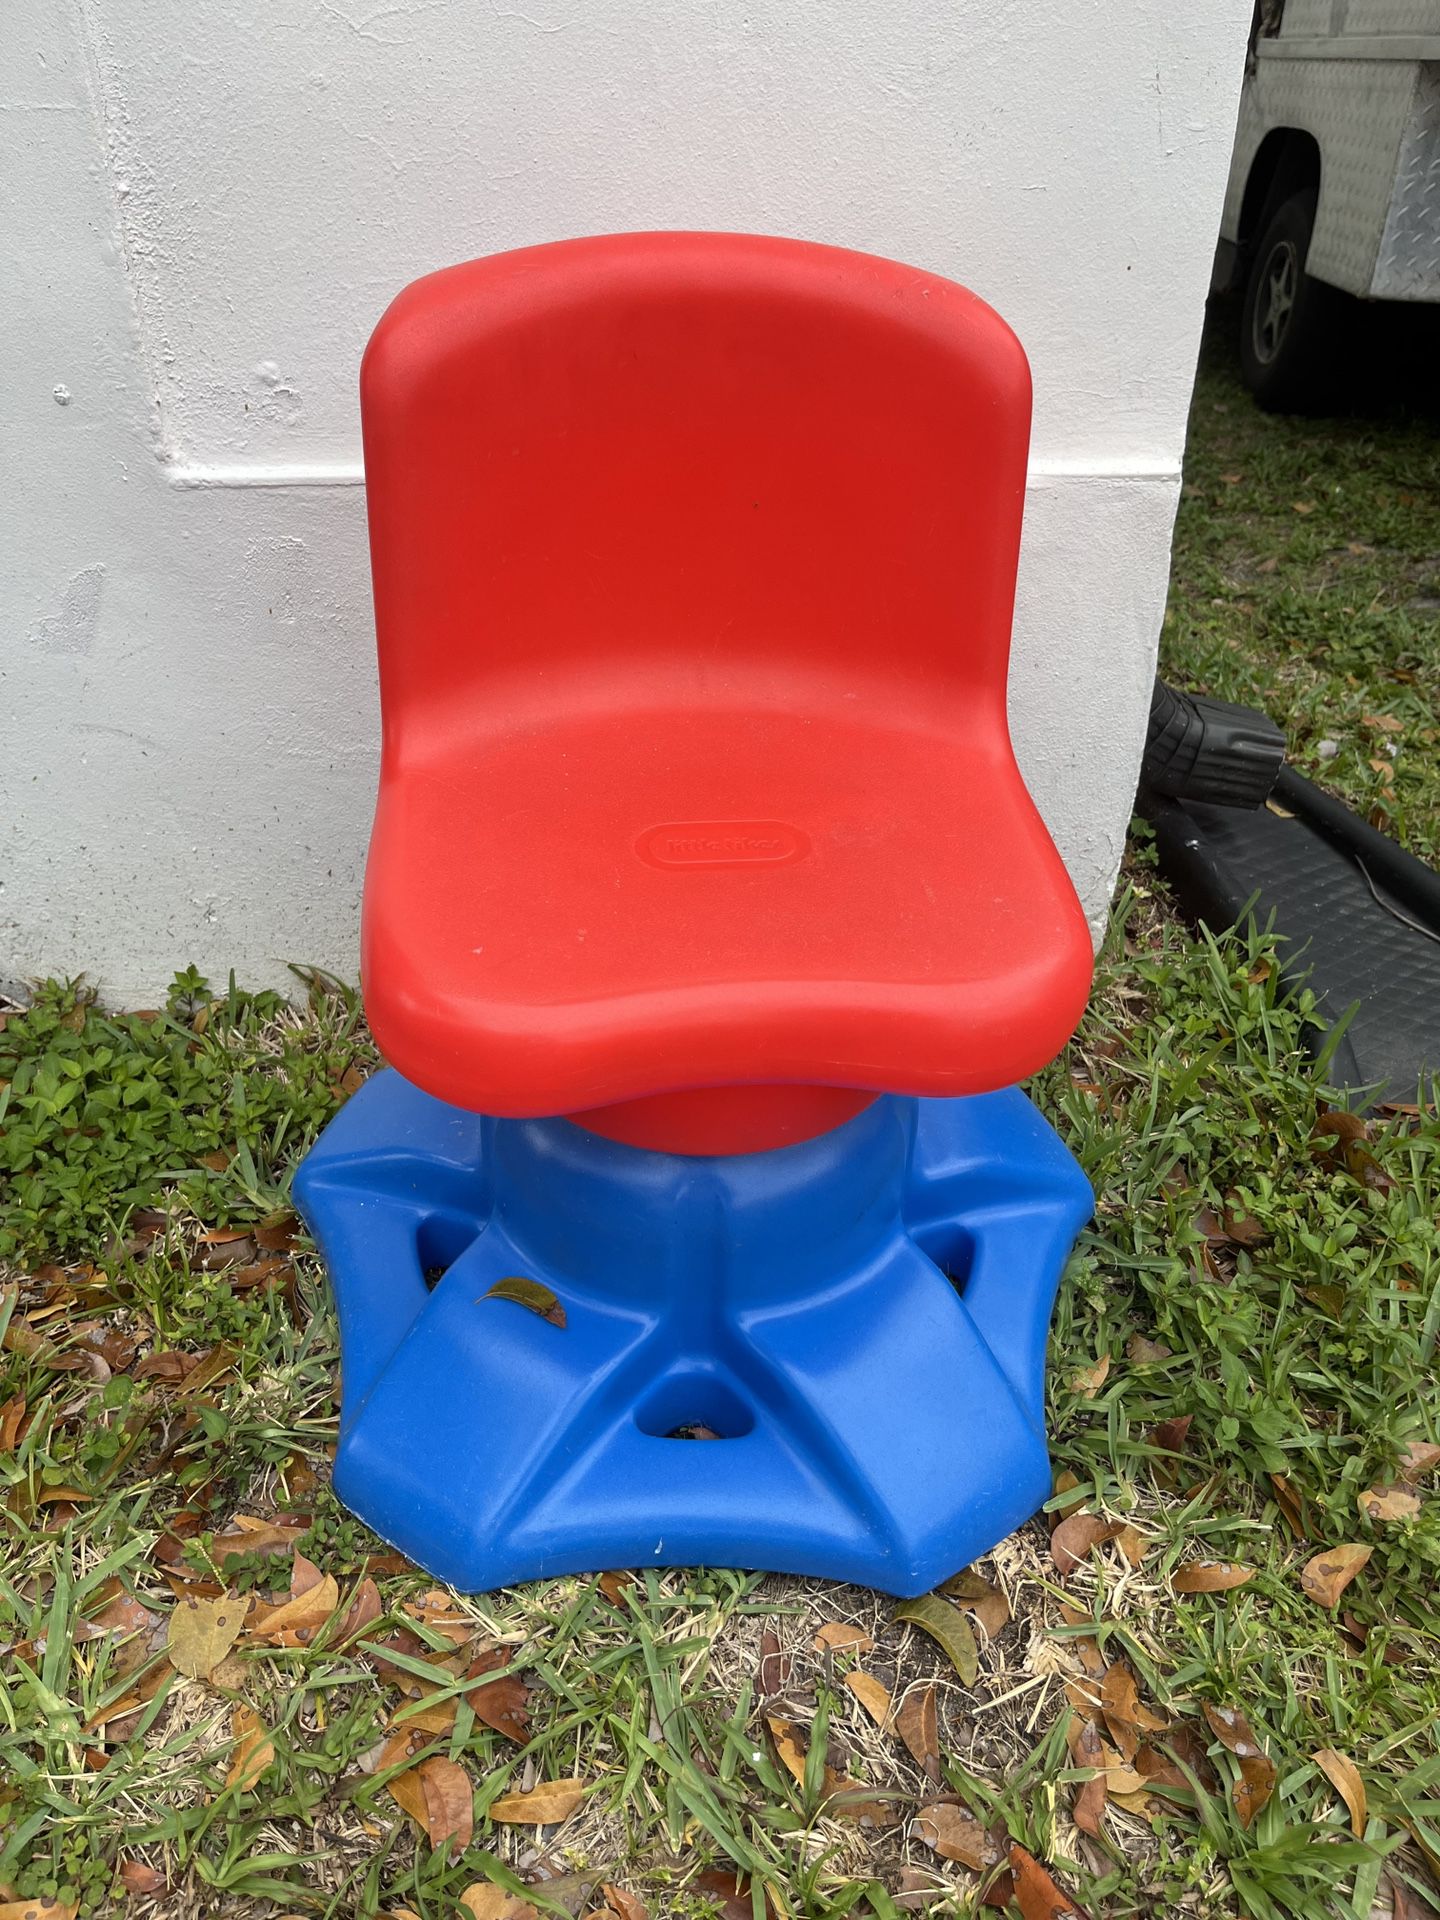 Vintage Discontinued Little Tikes Swivel Desk Chair Childrens Kids Infant Toddler Play